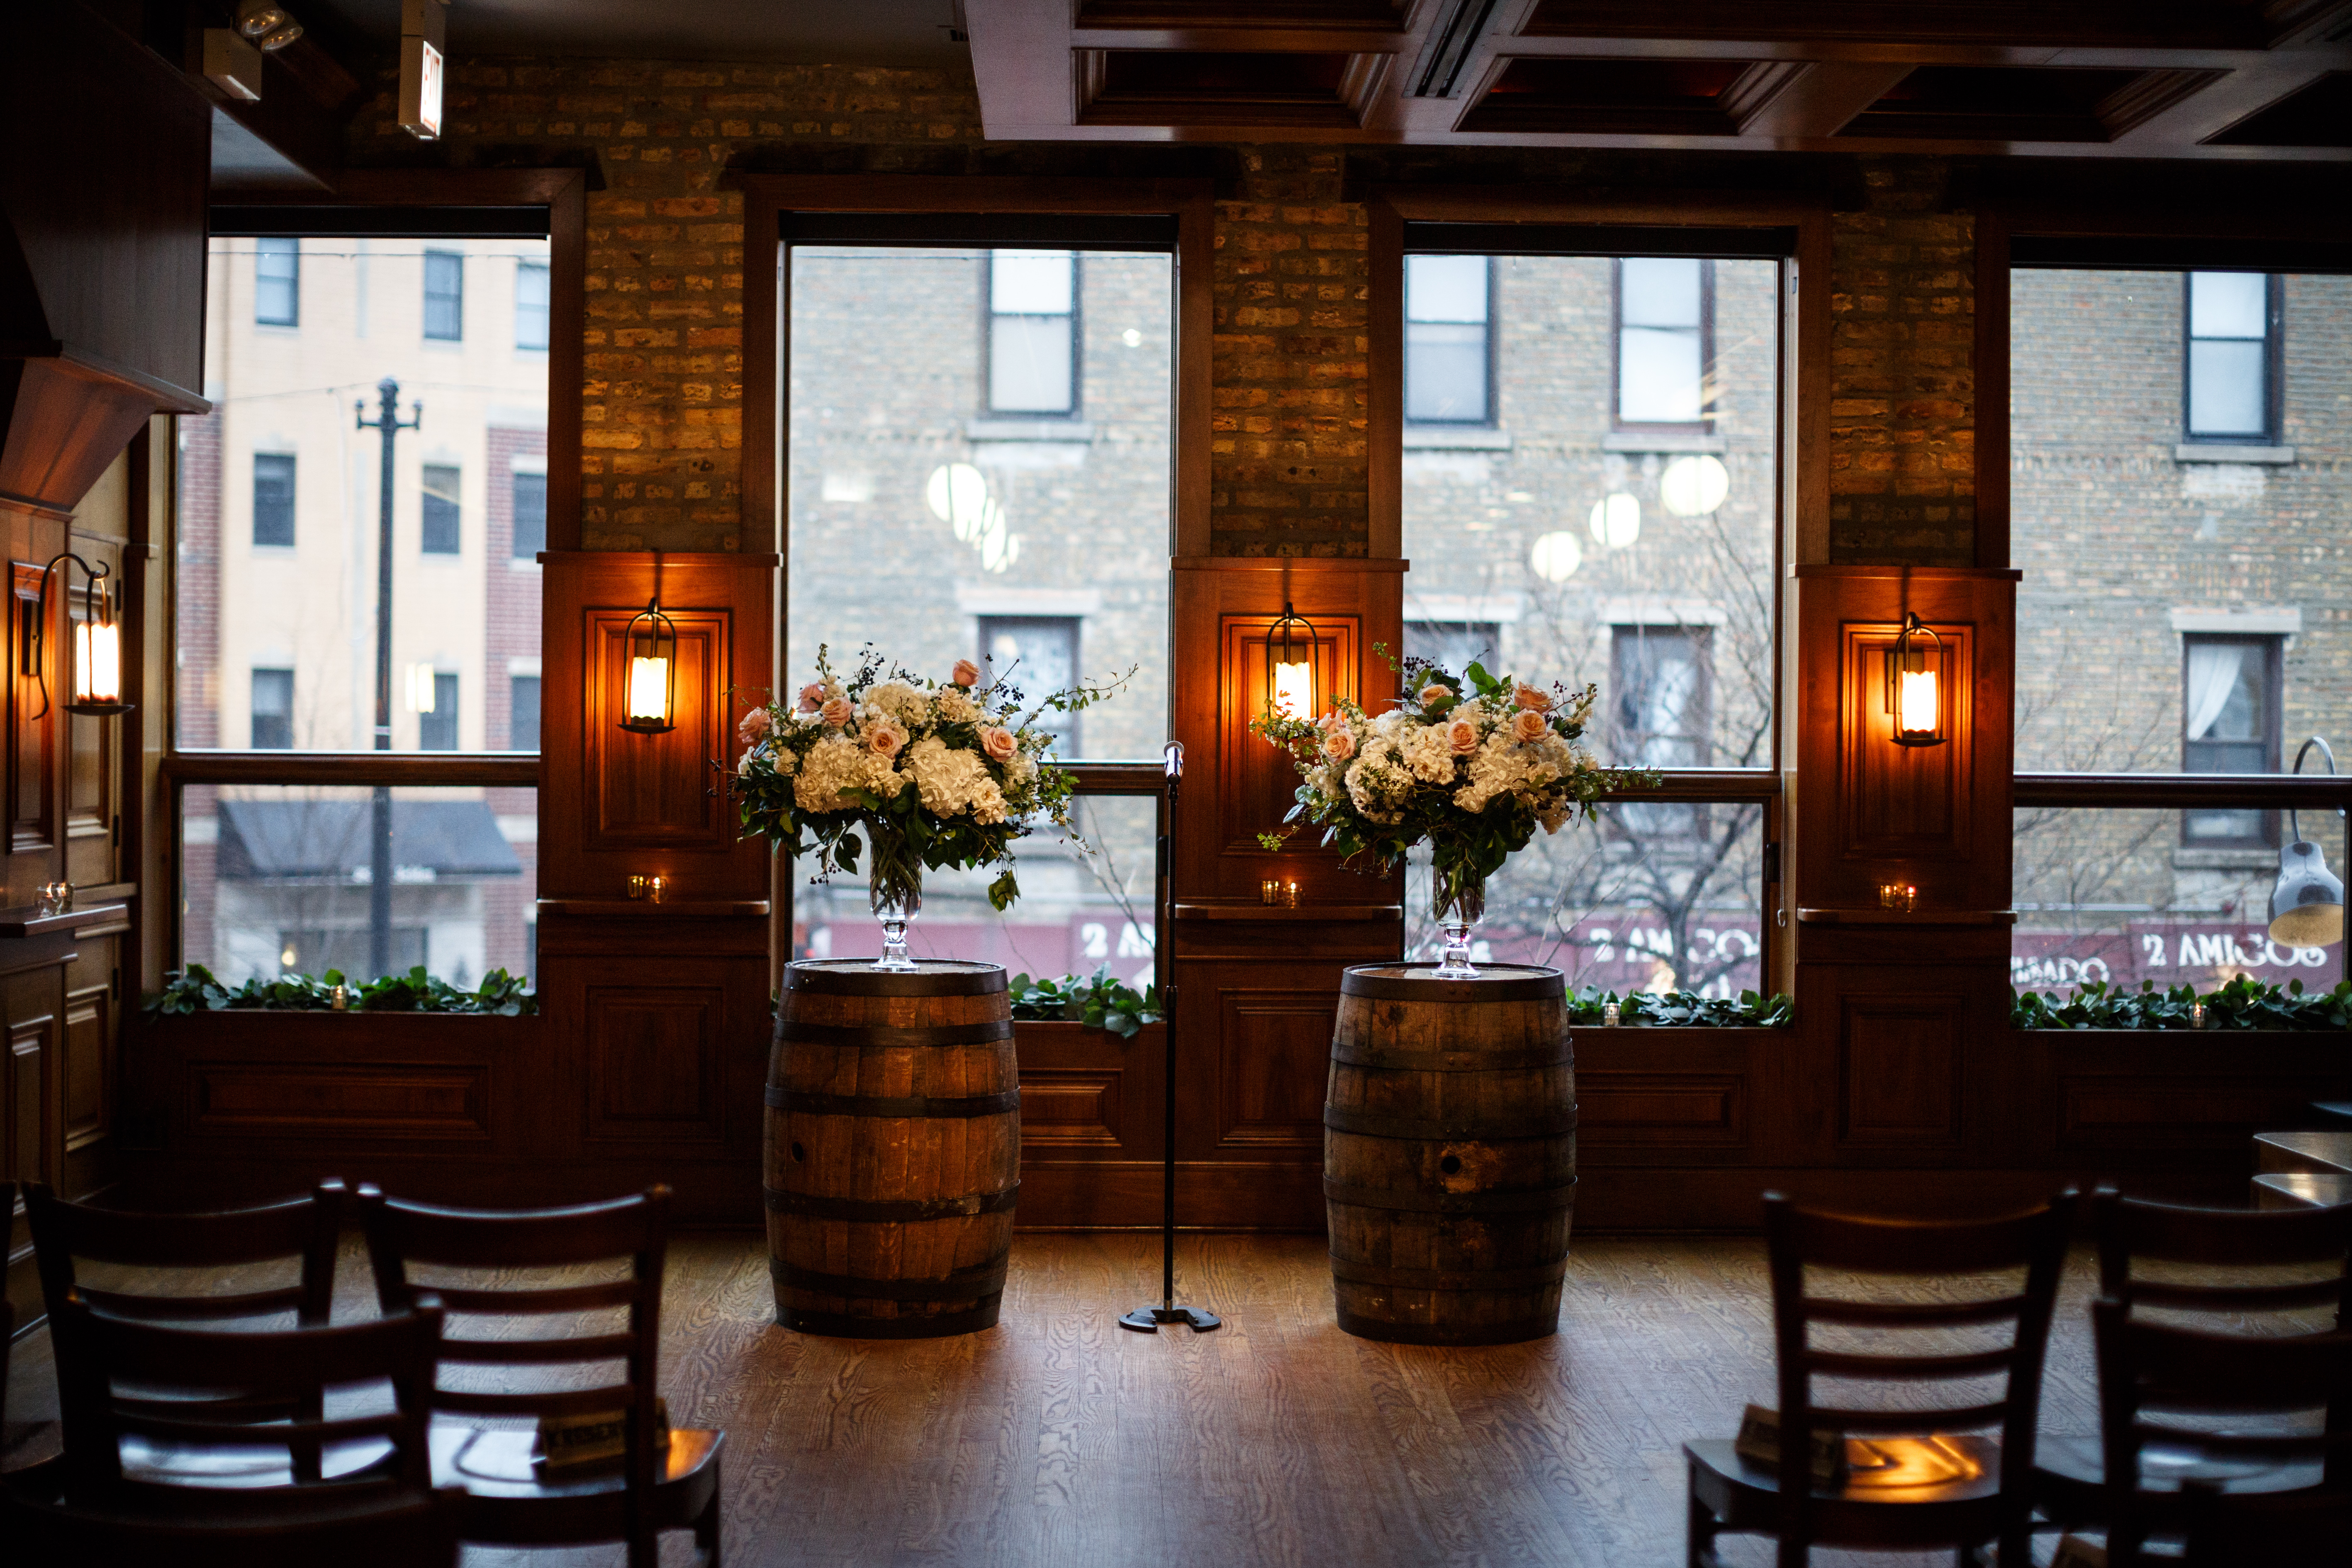 Two gardeny arrangements, foliage-lined windows sills, and Revolution Brewing’s rustic space made for an atmosphere that was fresh and inviting.